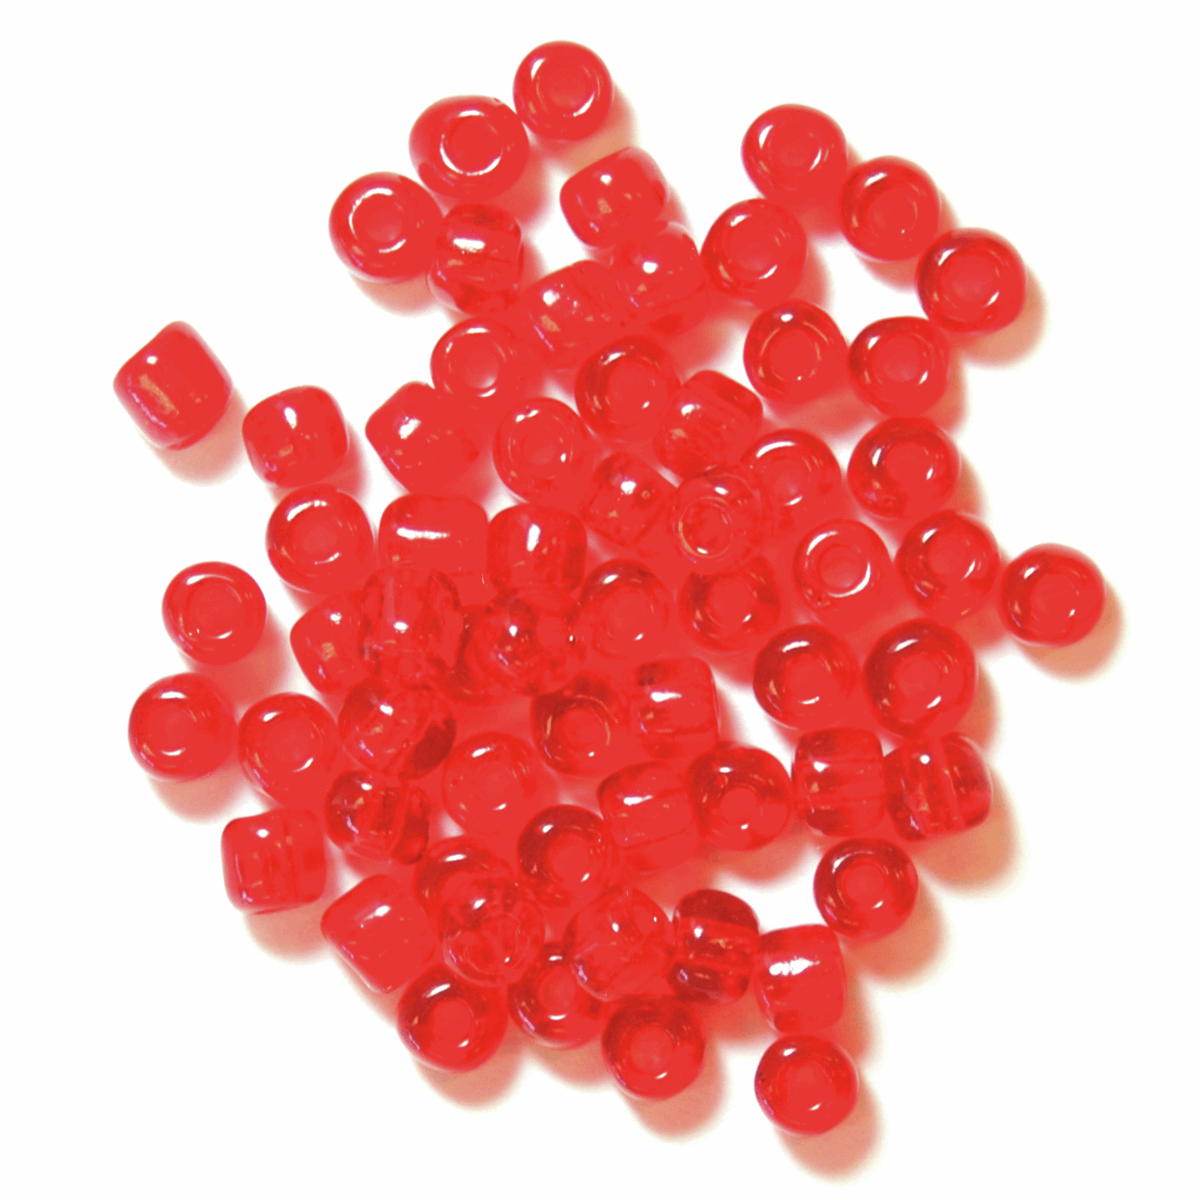 Trimits Red E Beads - 4mm (Pack of 15g)